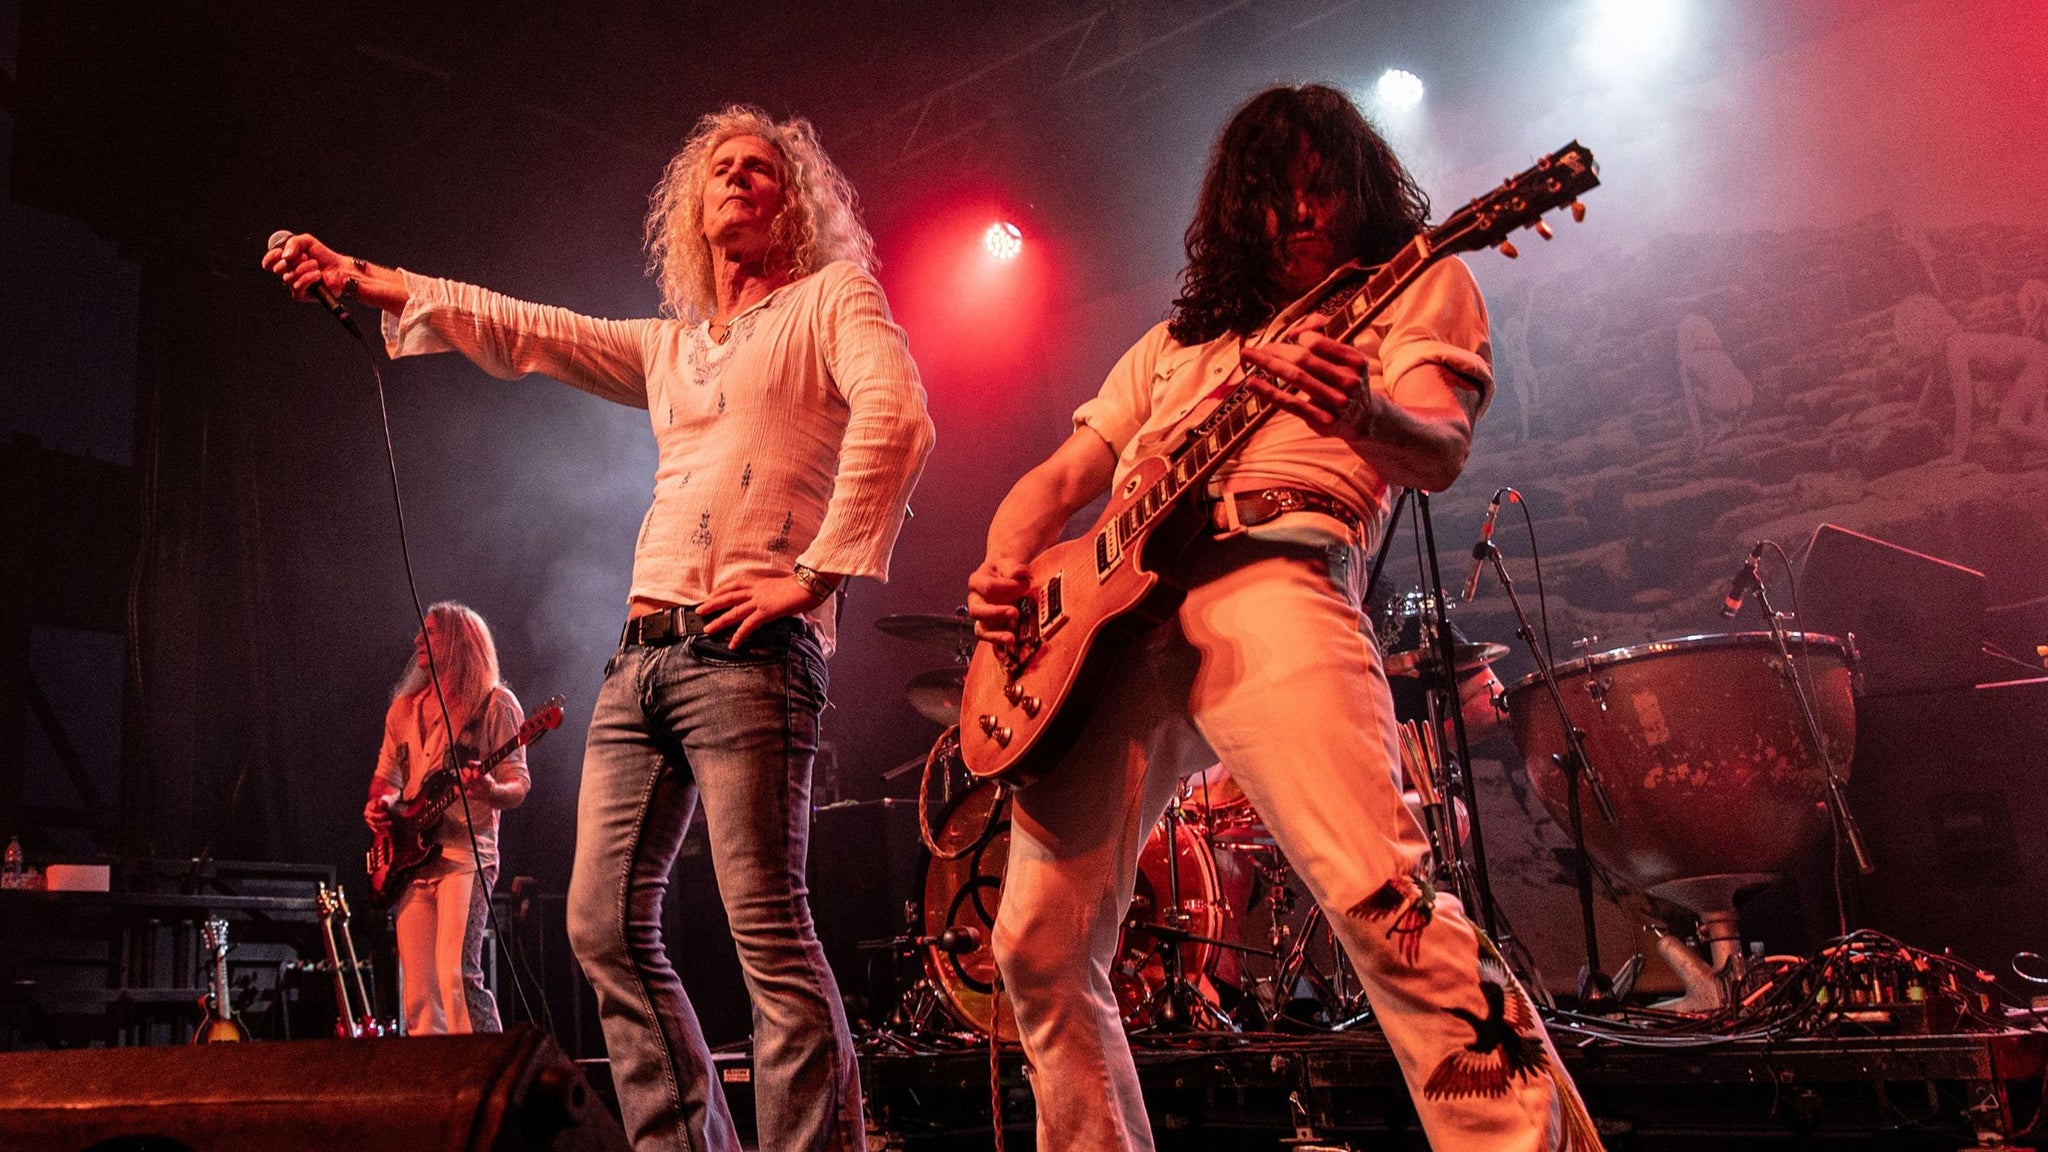 Zoso The Ultimate Led Zeppelin Experience